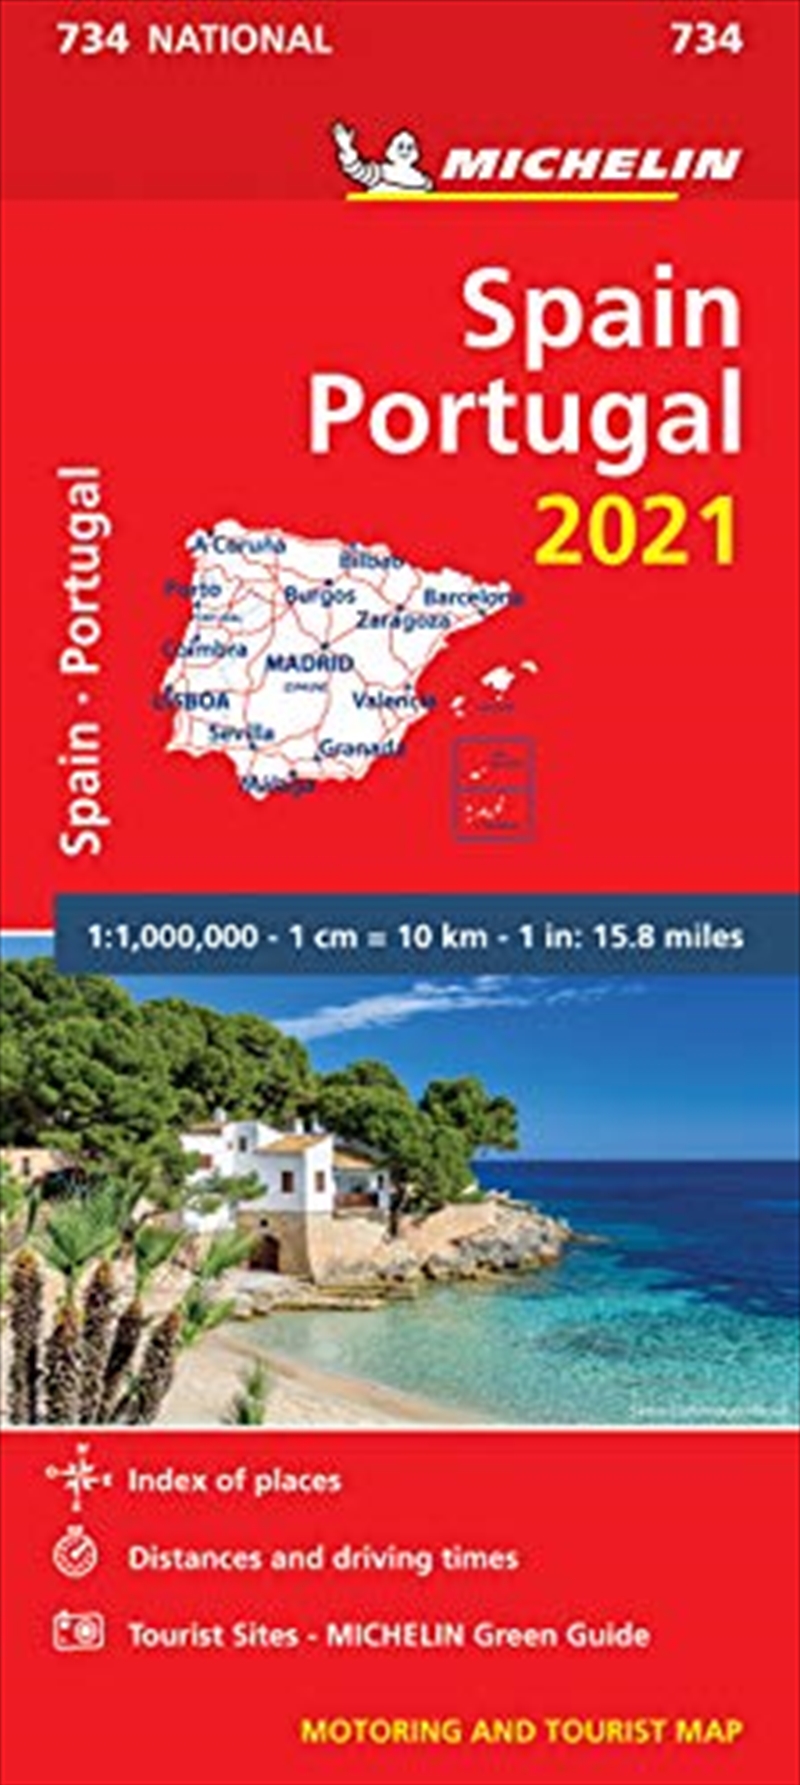 Spain & Portugal 2021 - Michelin National Map 734: Maps (Michelin National Maps)/Product Detail/Recipes, Food & Drink